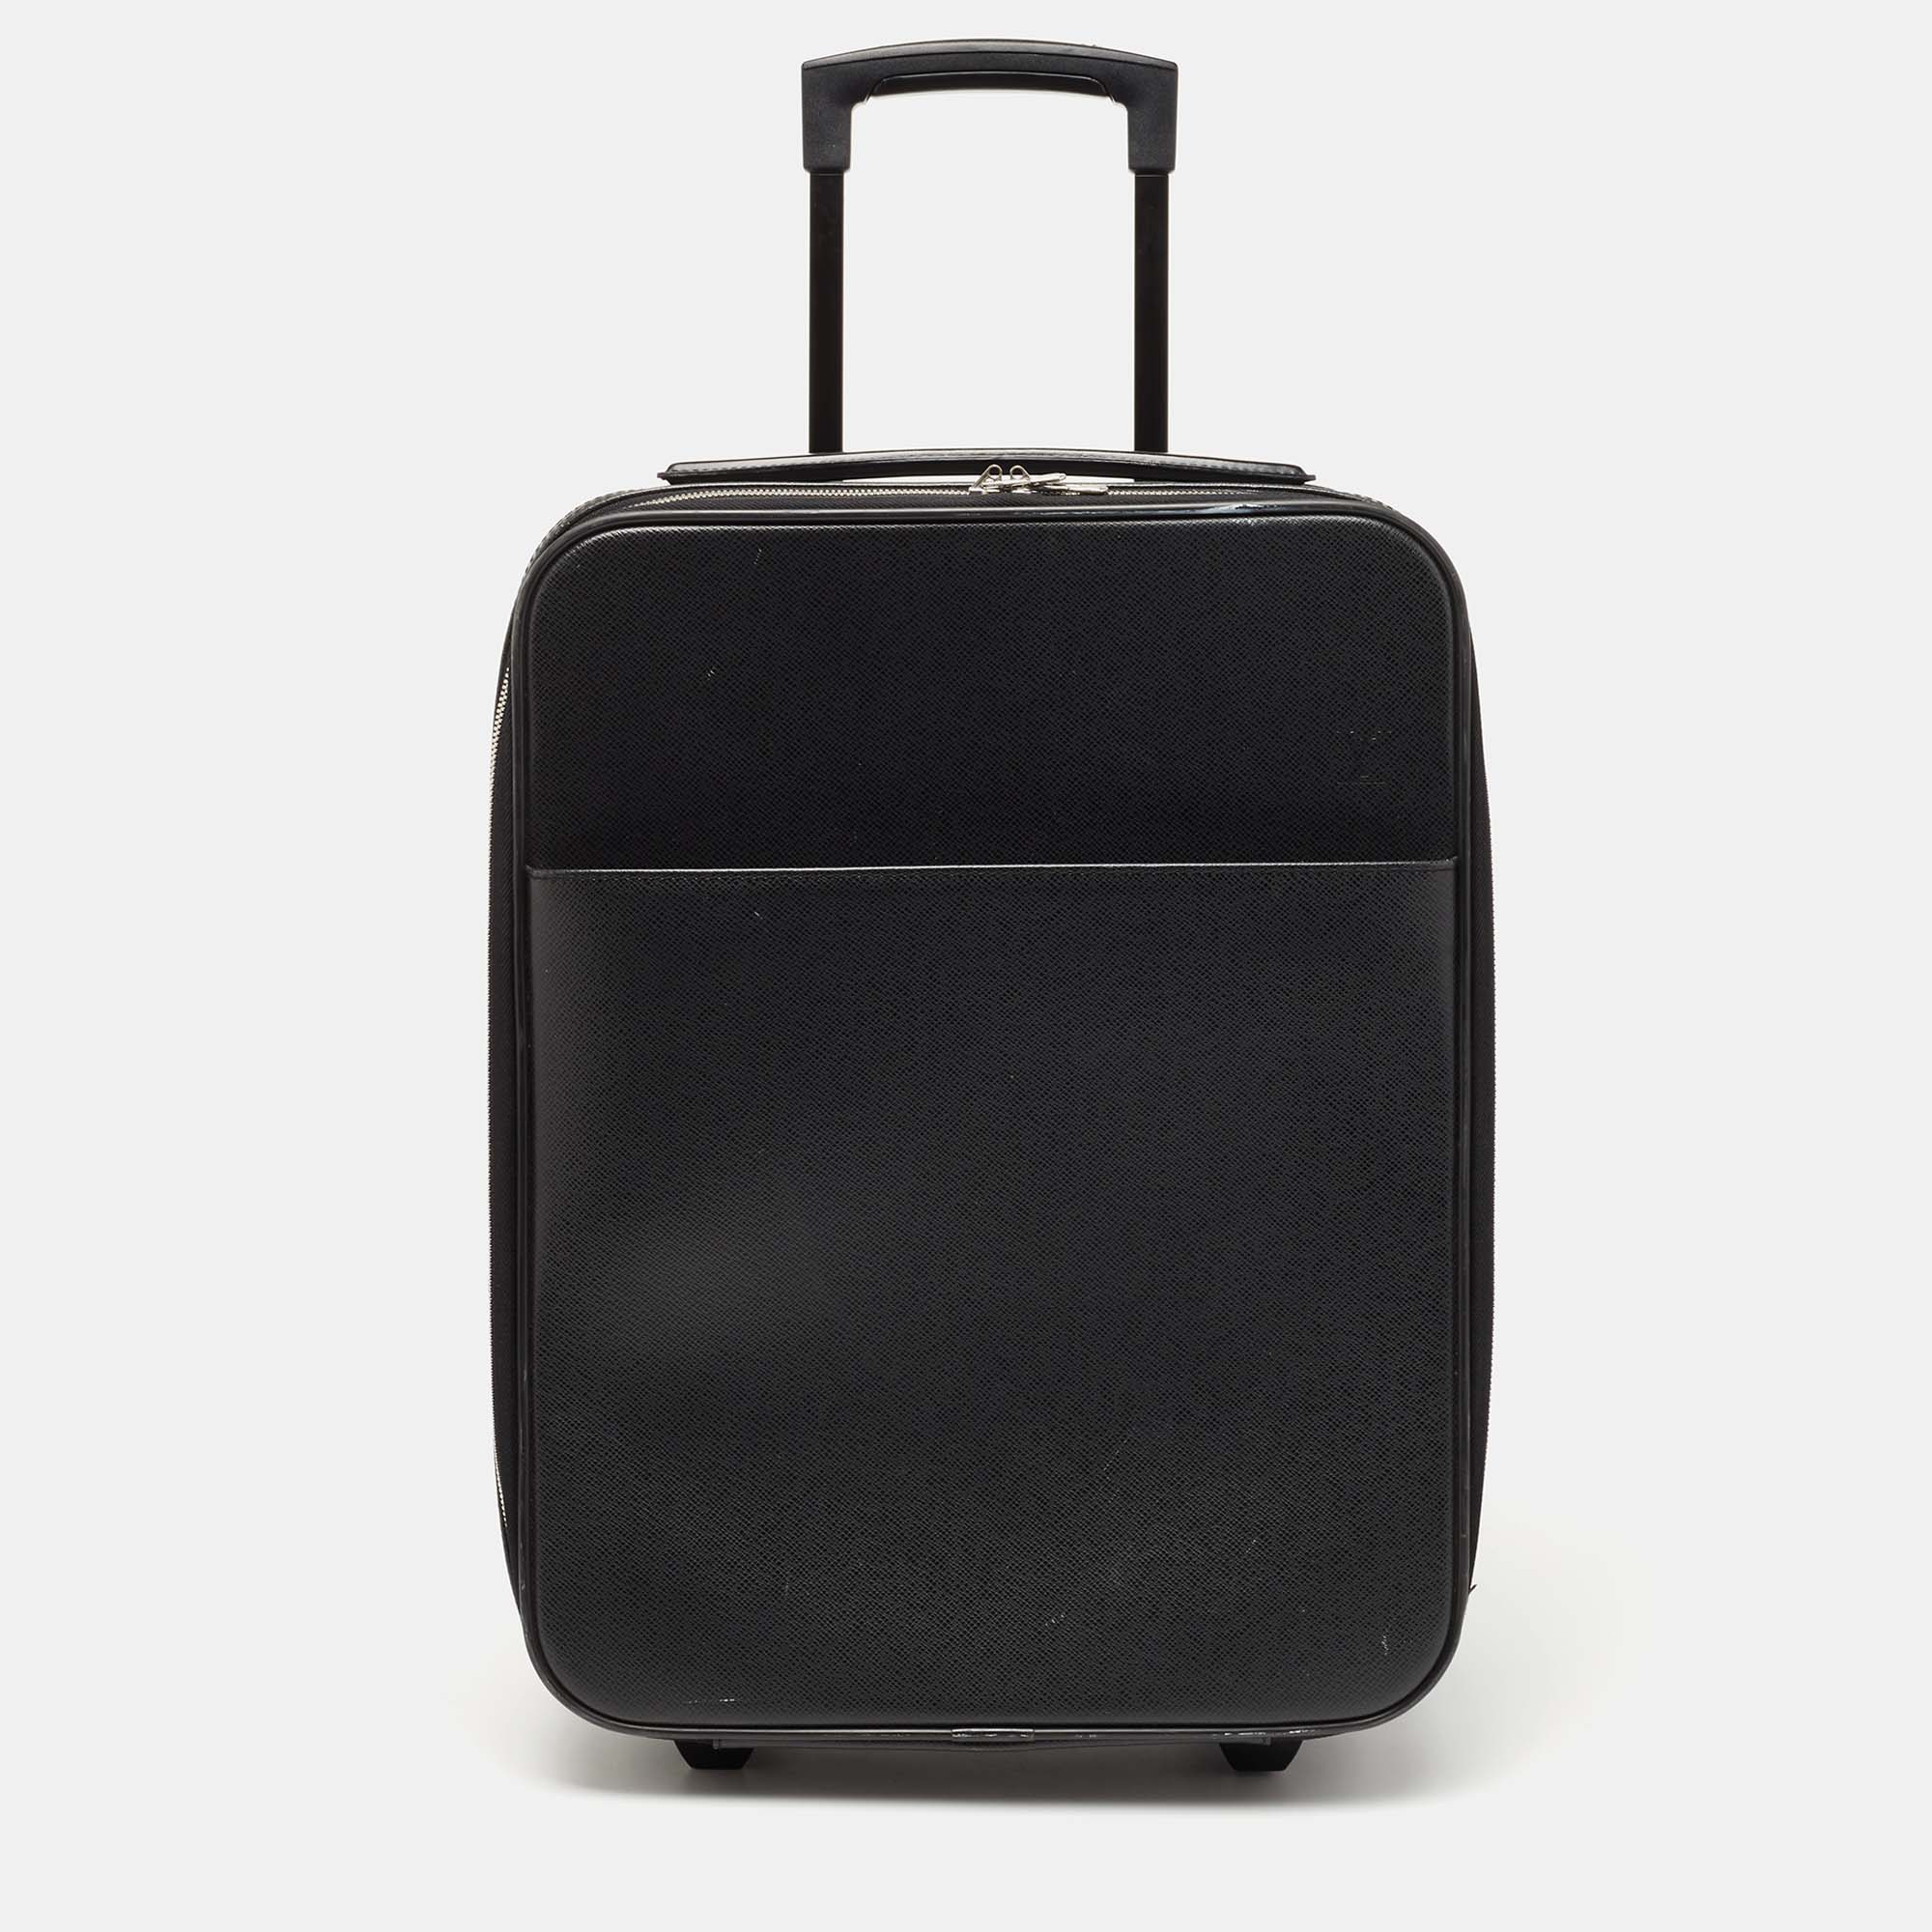 This Pegase 45 Business luggage from Louis Vuitton is super sturdy practical and stylish for long vacations. Crafted from Ardoise Taiga leather this luggage bag displays silver tone fittings a trolley handle and a neat nylon lined interior. For convenience this Louis Vuitton creation is the best buy